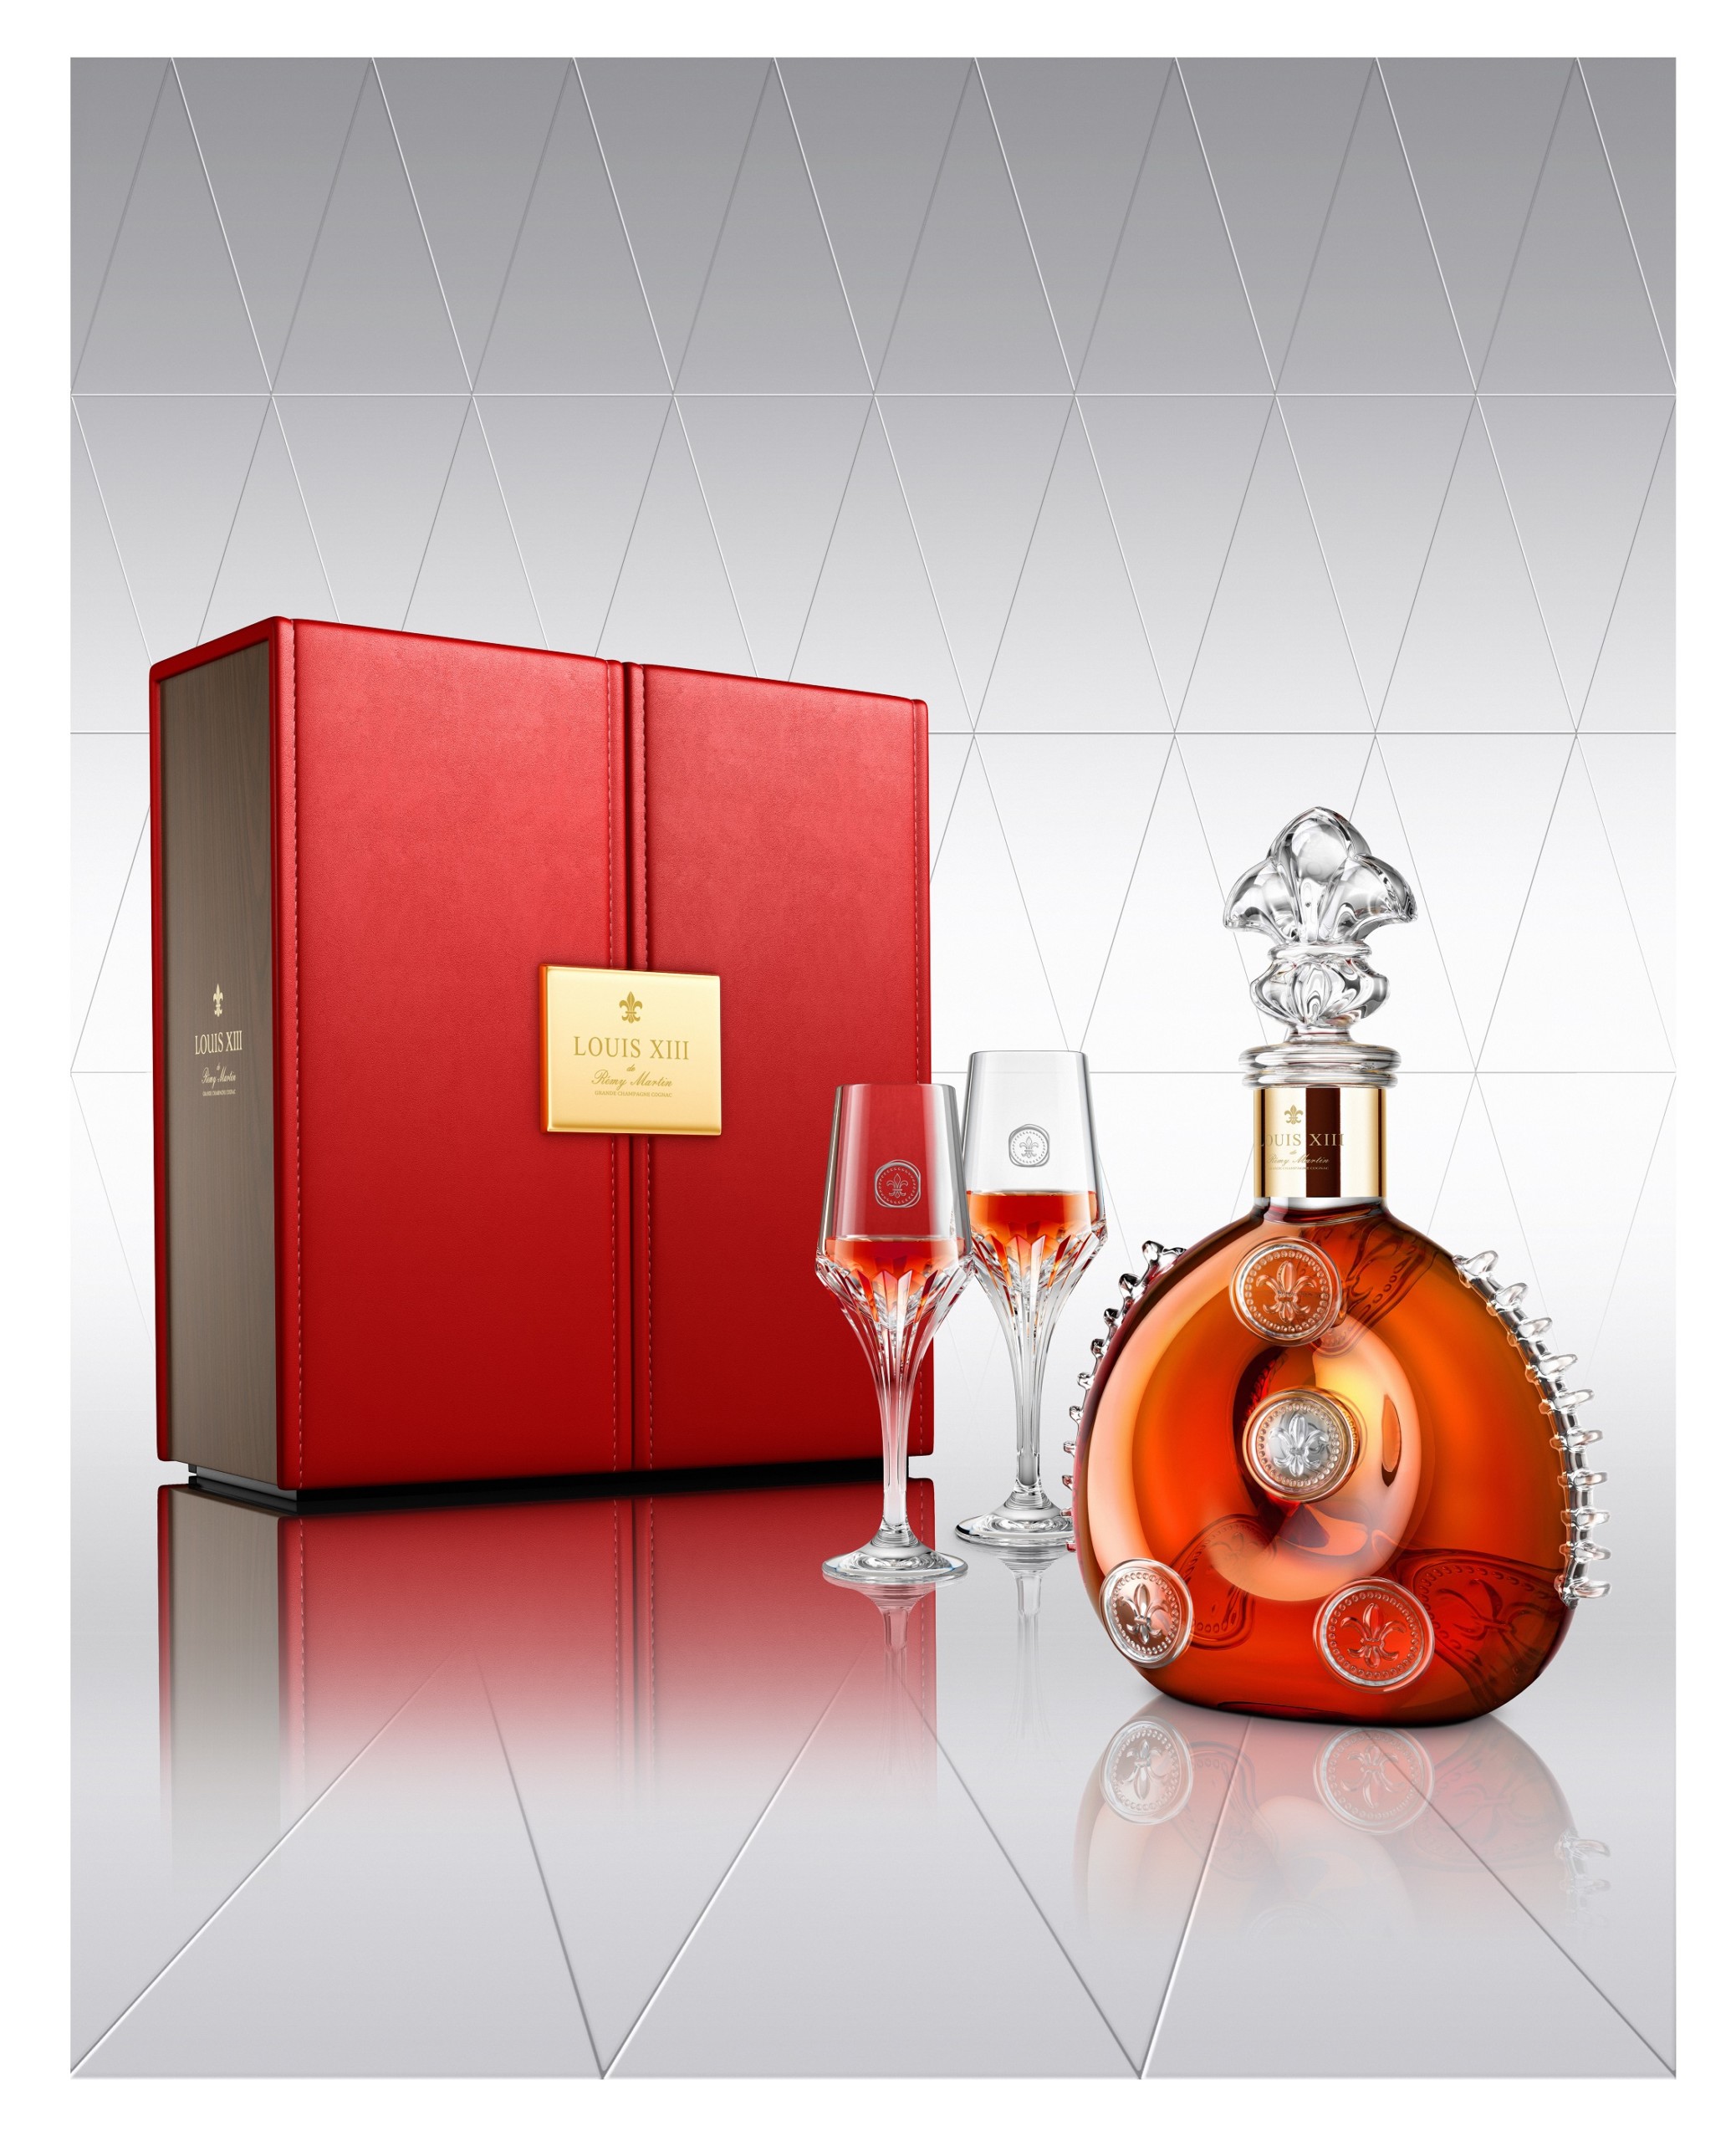 Buy Louis XIII The Classic Decanter 700ml - Price, Offers, Delivery